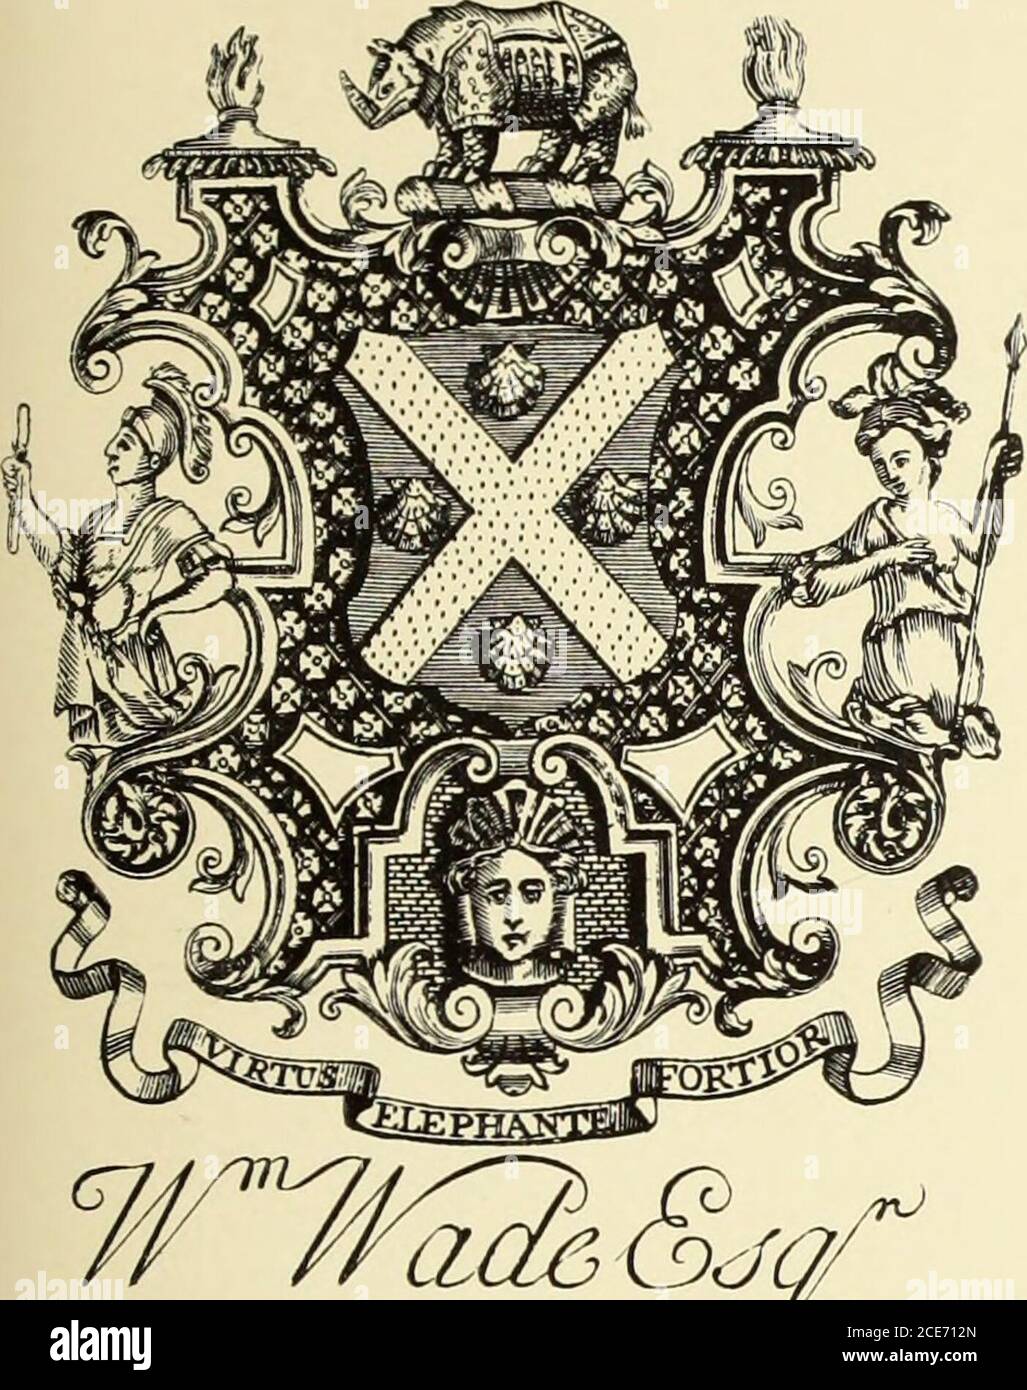 . Artists and engravers of British and American book plates : a book of reference for book plate and print collectors . ork Armorial Green. Cork Armorial 1820 Green. Cork Armorial 1830 Green. Cork Armorial 1810 Green. Cork Armorial Green. Cork Armorial Green. Cork Armorial 1820 Green. Cork Armorial Green. Cork Armorial 1810 Green. Cork Armorial Green. Cork Armorial 1810 Green. Cork Armorial Green. Cork Armorial Green. Cork Armorial 1820 Green. Cork Armorial fLi*OATt 1 (it!. Armorial Gfr66H. Cork Armorial Armorial Green. Cork Armorial Green. Cork Armorial 1820 Green. Cork Armorial B. Green f. C Stock Photo